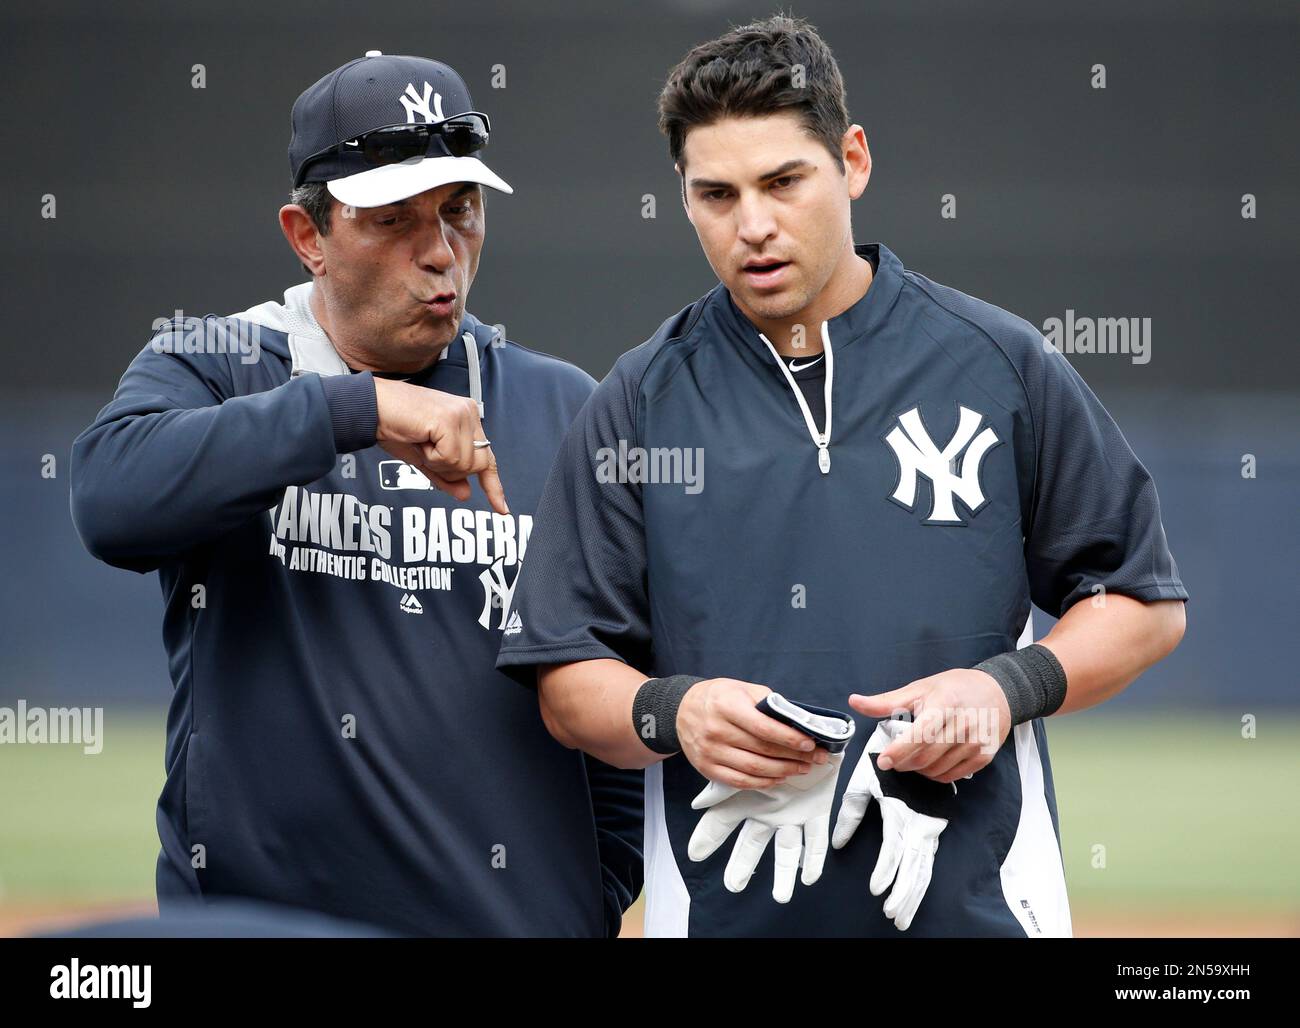 New York Yankees spring training guest instructor Lee Mazzilli